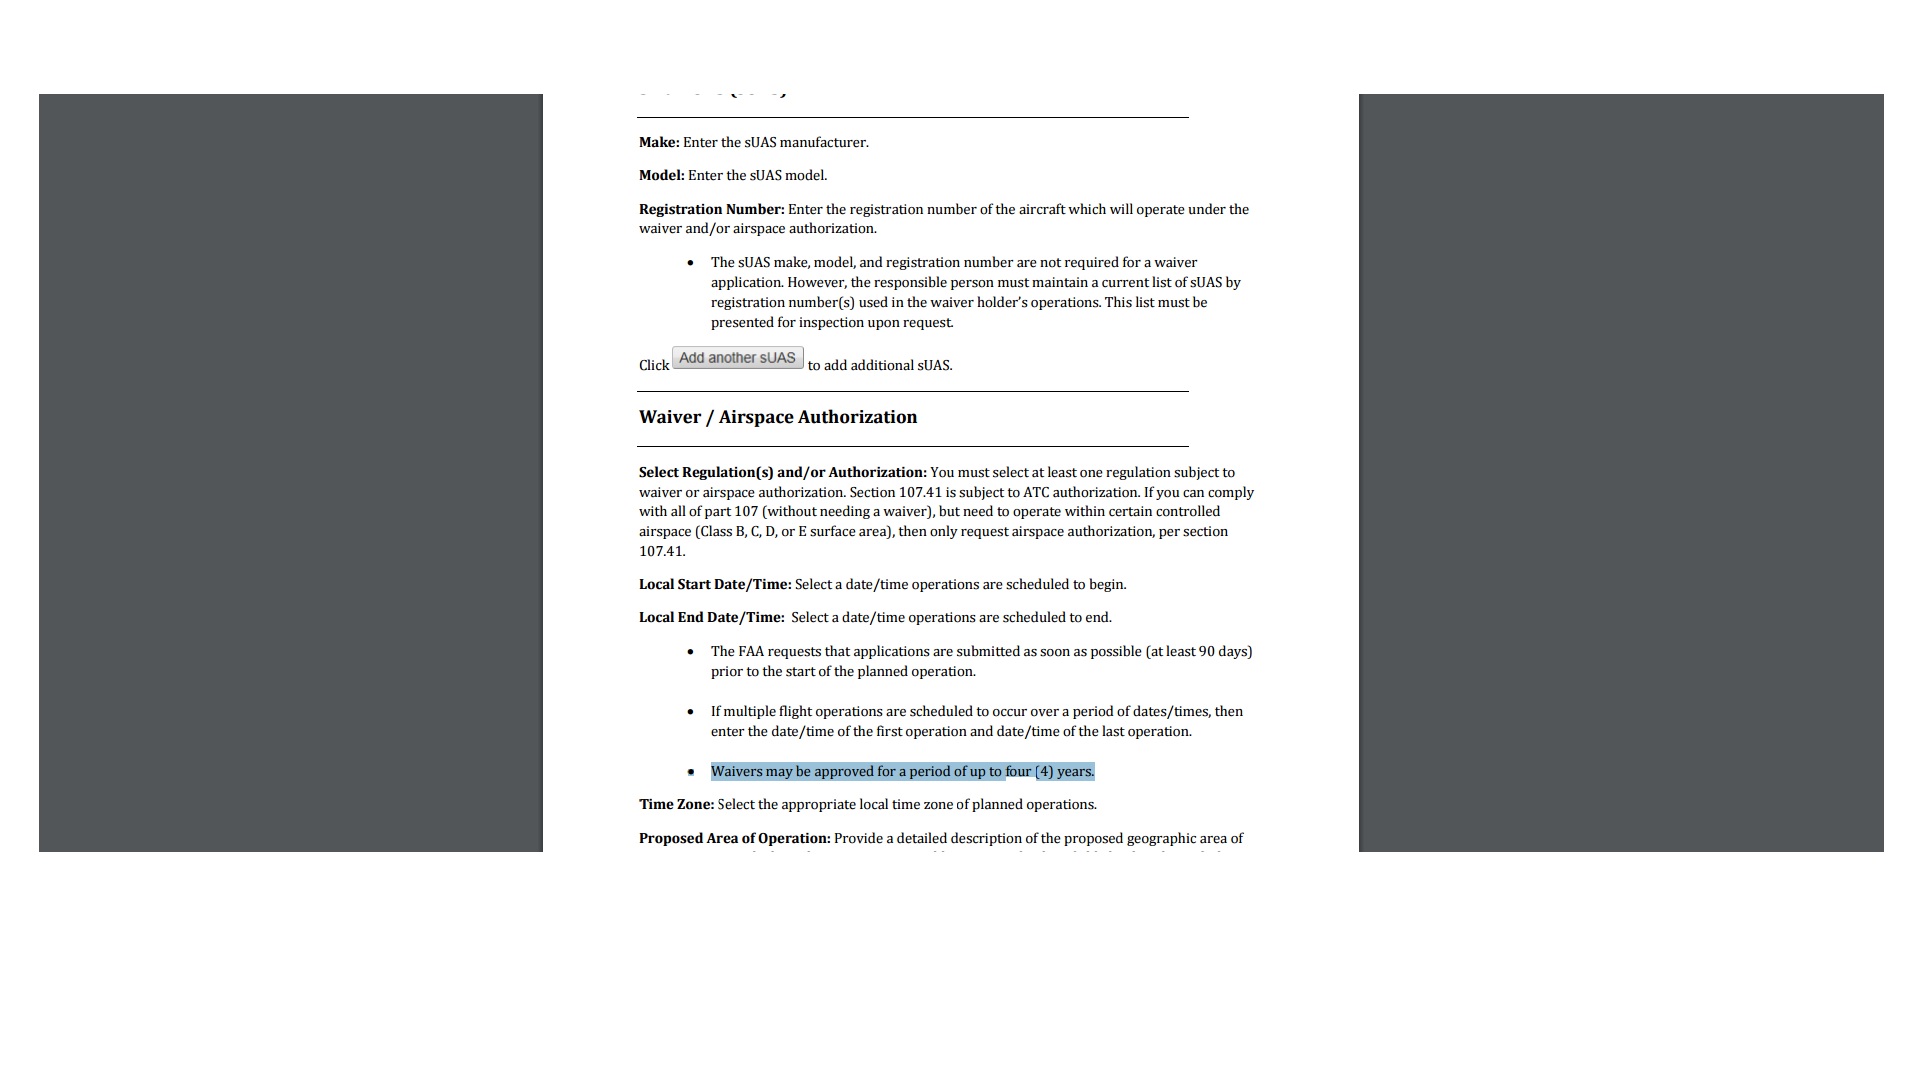 Airspace Waiver Authorization Instructions Page 3 Screenshot.jpg